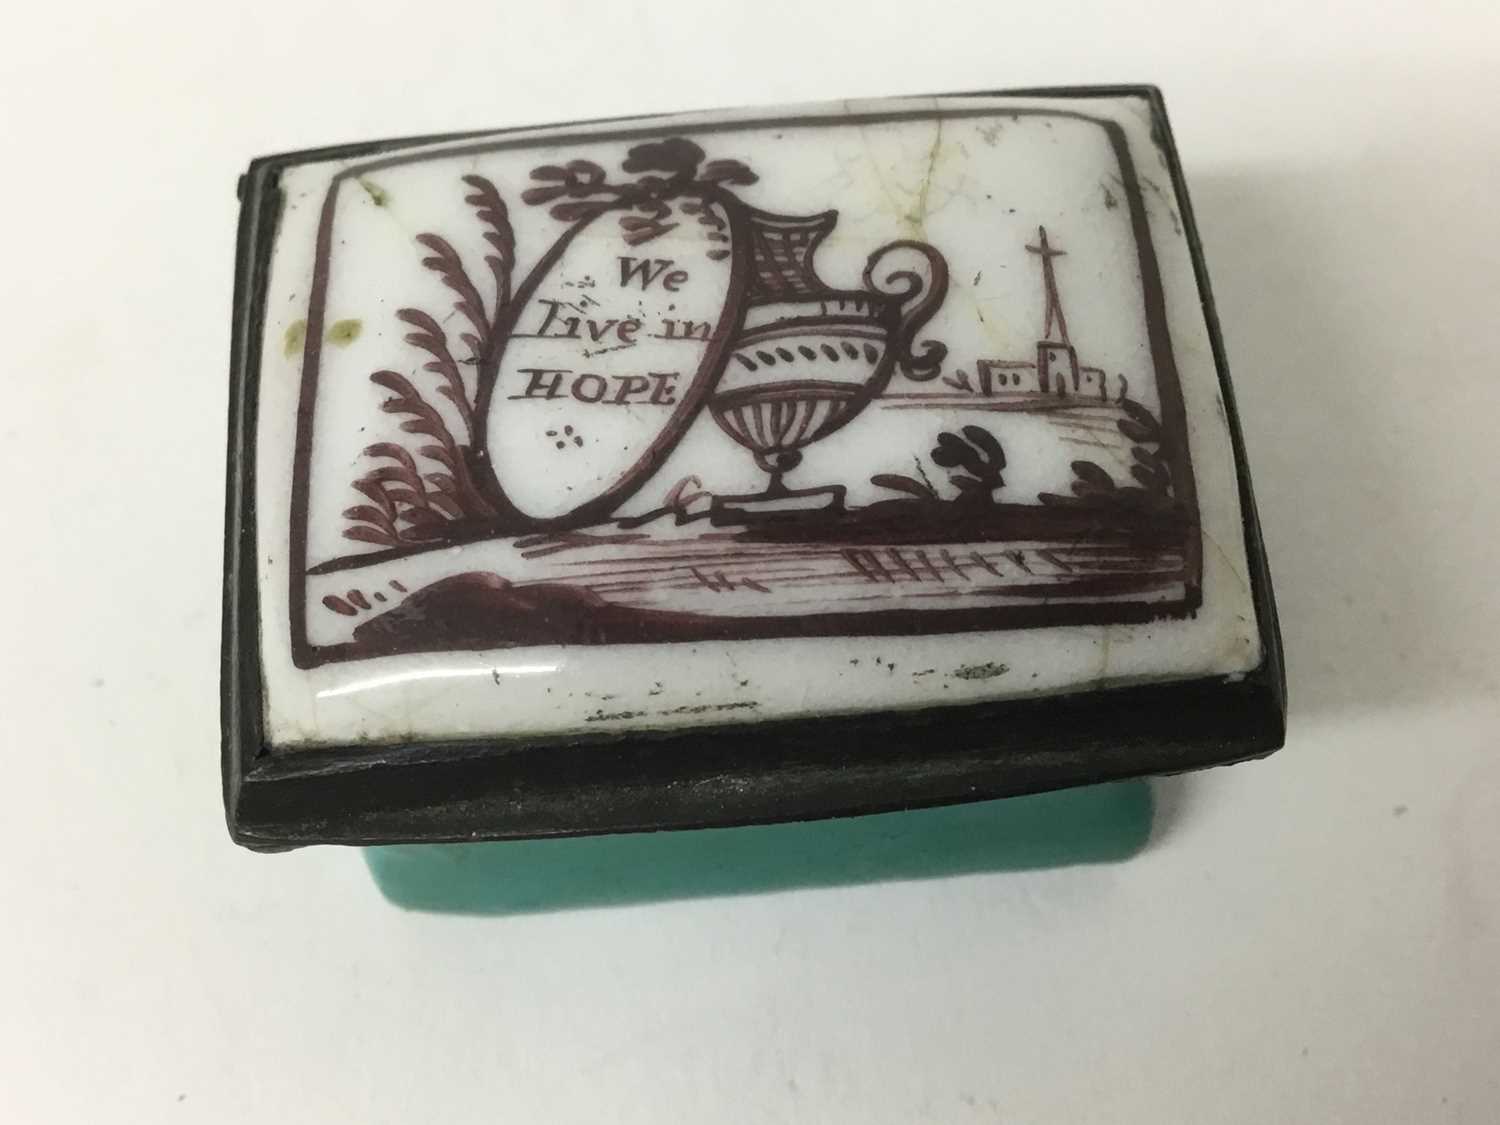 Lot 1 - Ideal Christmas present for 2020: A South Staffordshire enamel rectangular patch box 'We Live in Hope', circa 1800-10